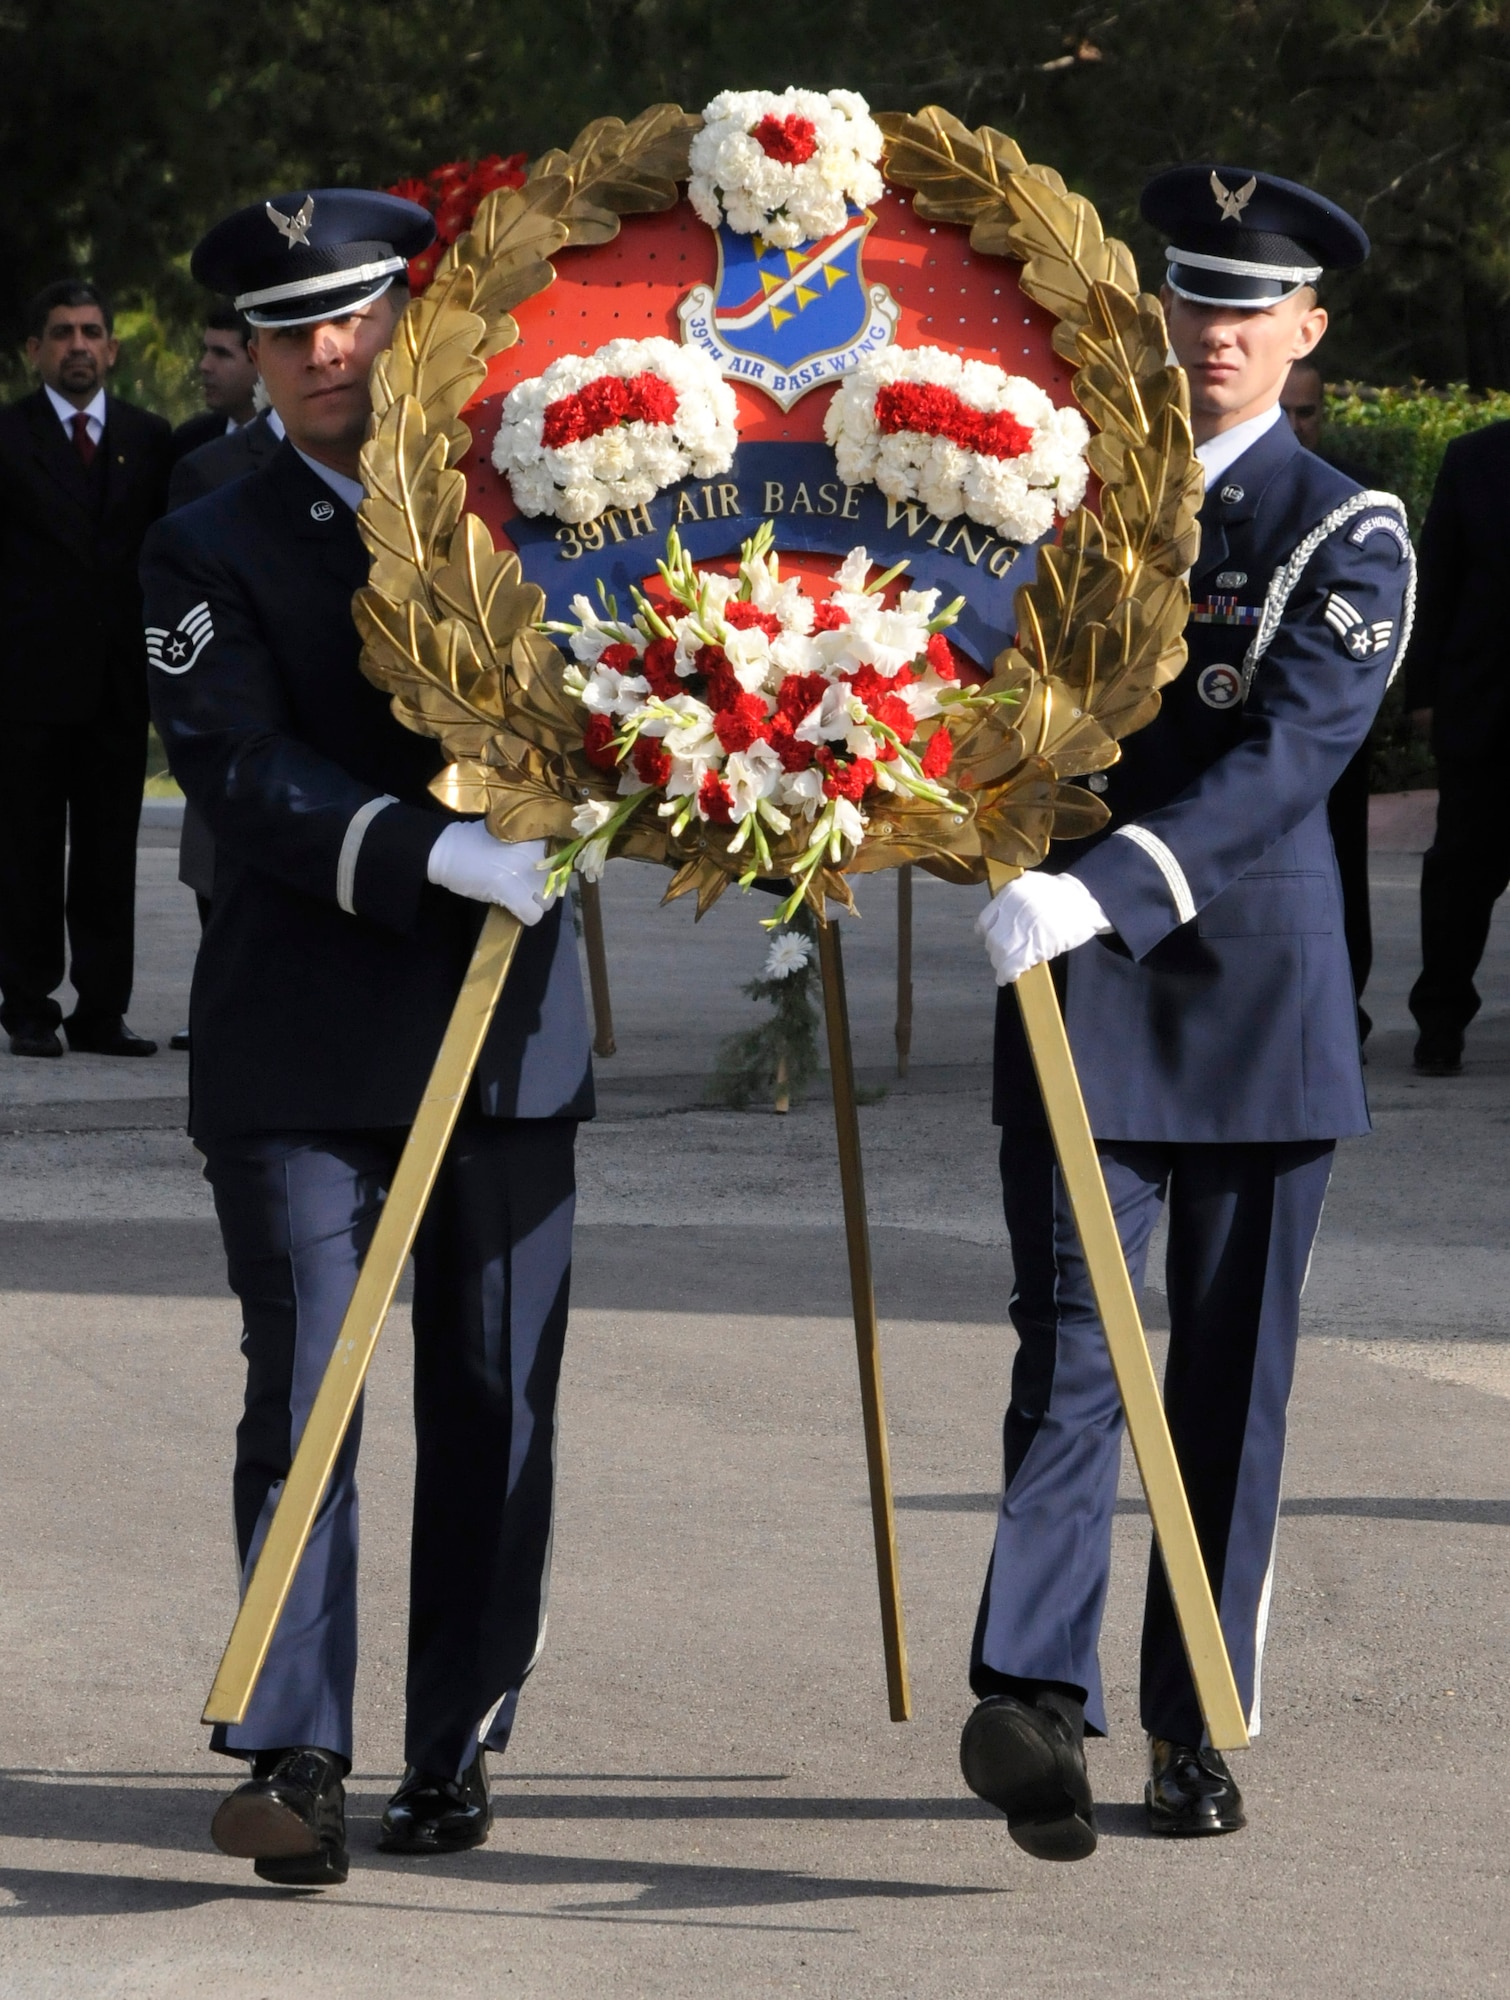 Members from the 39th Air Base Wing Honor Guard, present a wreath in honor of the 71st anniversary of Mustafa Kemal Ataturk’s death during the Ataturk Memorial Day Ceremony, Tuesday, Nov. 10, 2009 in front of the 10th Tanker Base Command Headquarters. The ceremony was open to all members of the Incirlik community.  (U.S. Air Force photo/Airman 1st Class Amber Ashcraft)